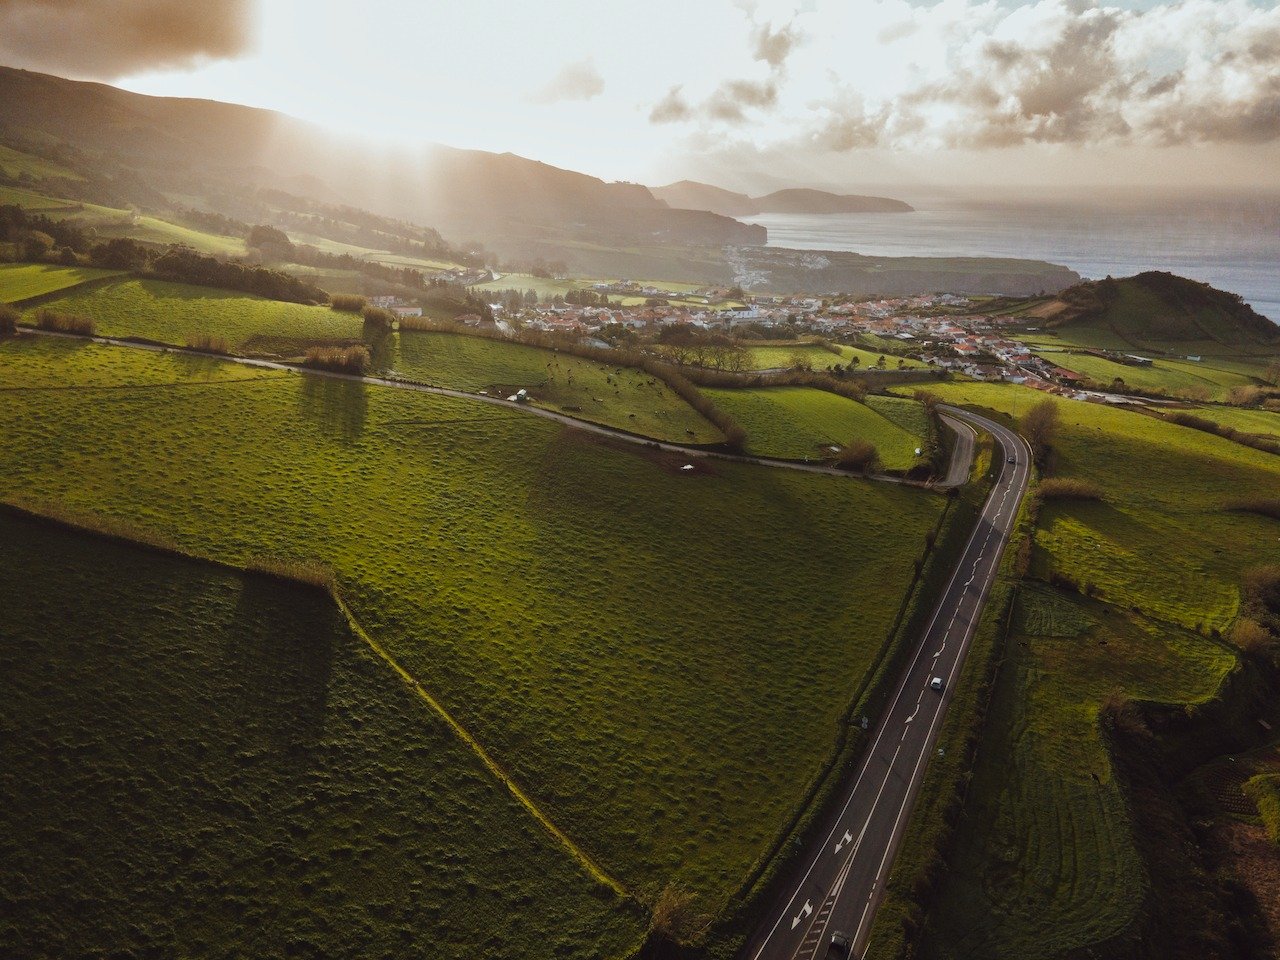 📍S&atilde;o Miguel, The Azores, Portugal

The Azores islands are one of two autonomous regions of Portugal (the other being Madeira), located roughly 1000 miles from mainland Portugal. It is a 9-island archipelago that are split into three groups: E